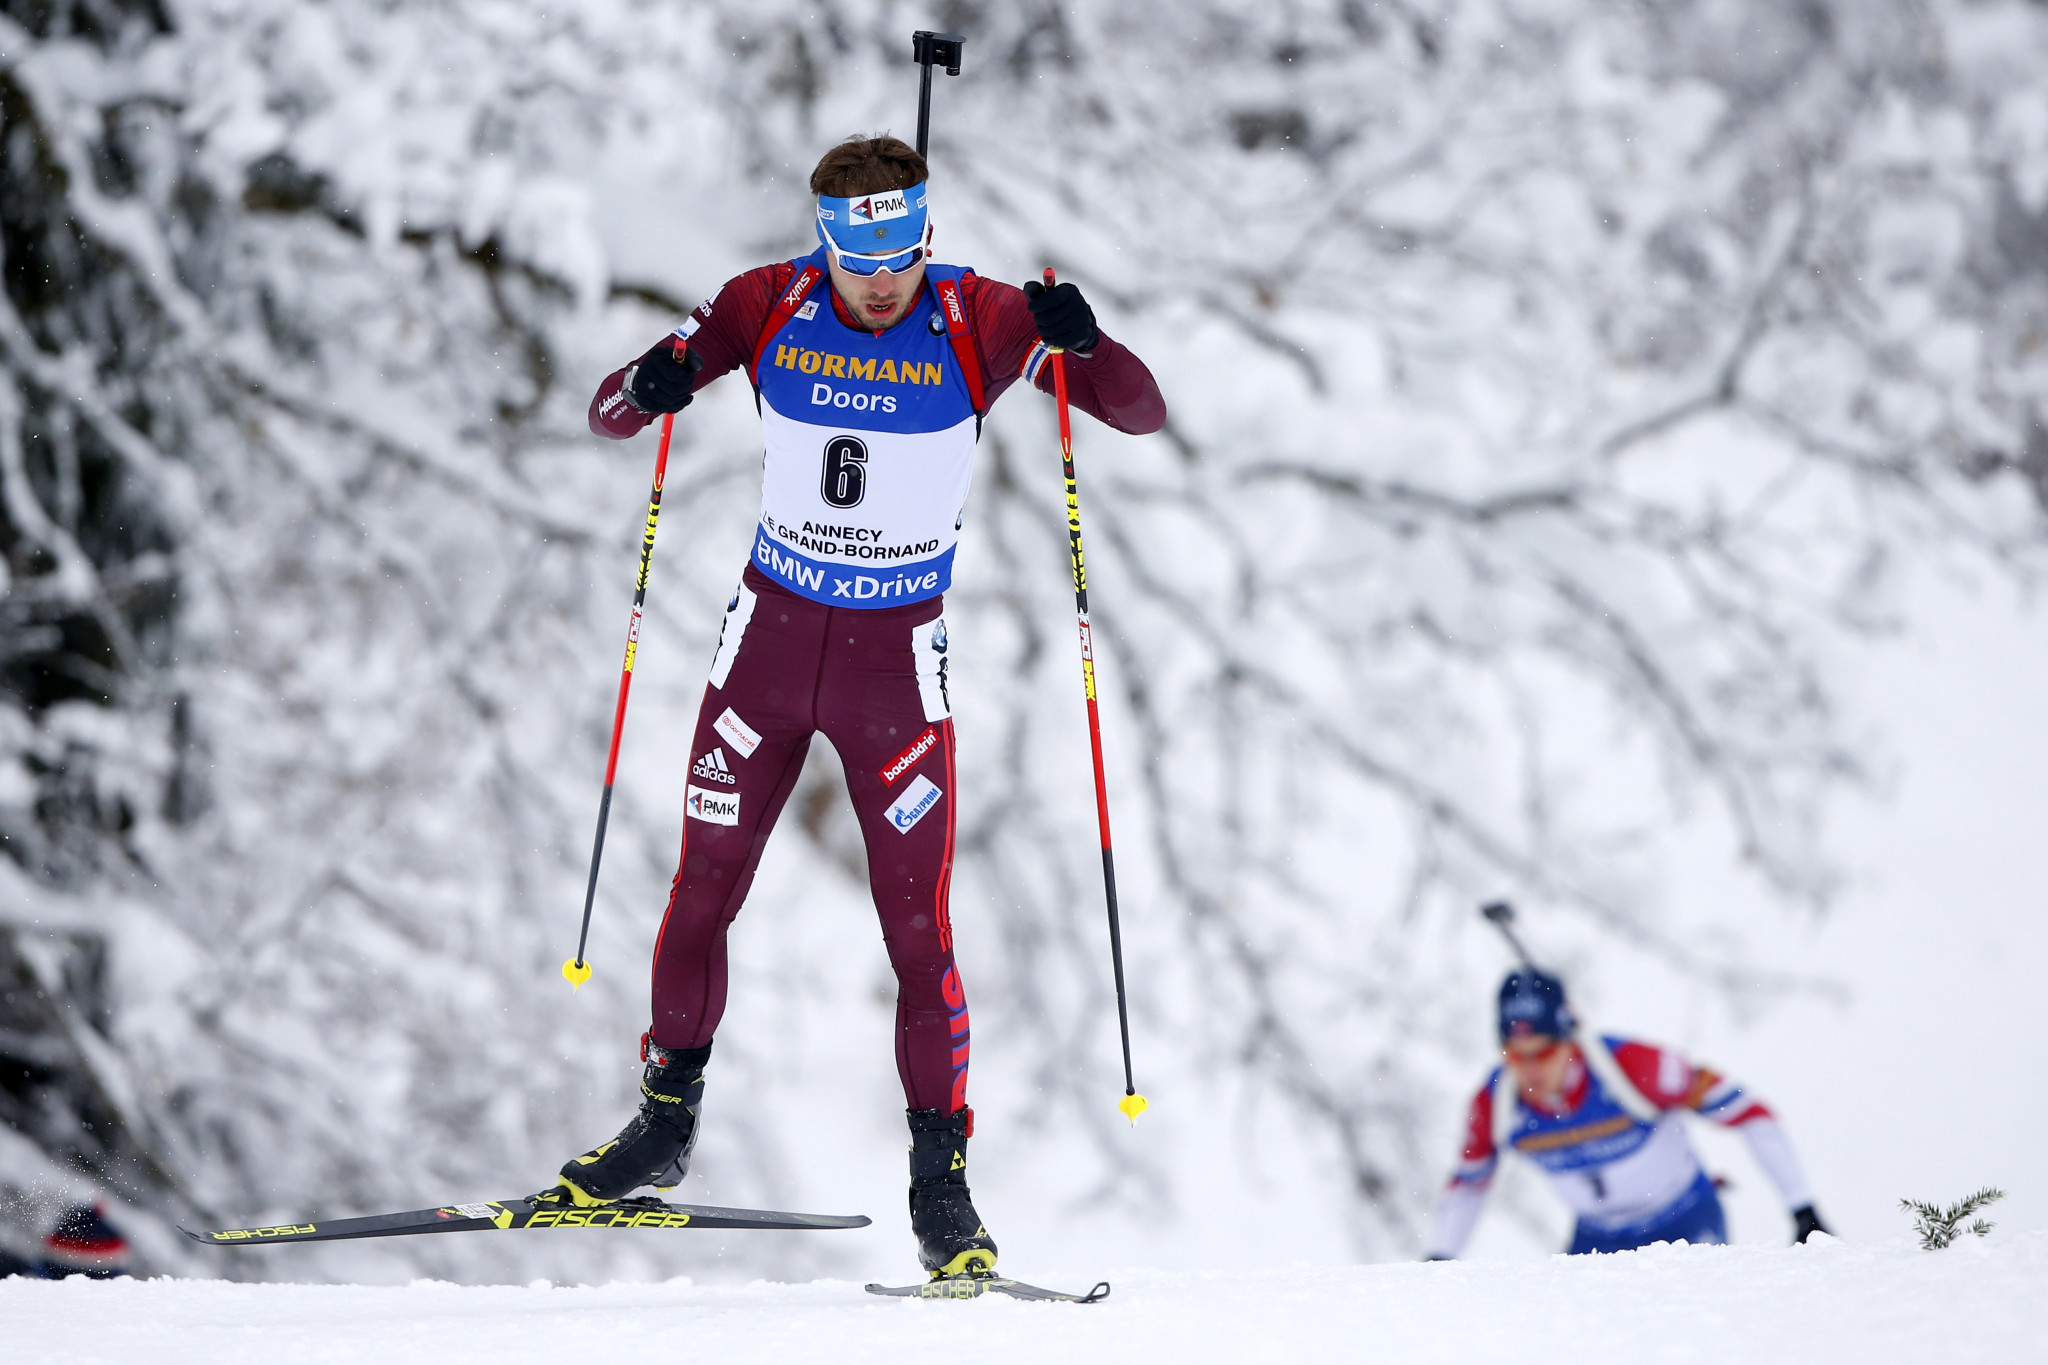 Russia will be aiming to end their podium drought when the International Biathlon Union World Cup season continues in Ruhpolding ©Getty Images